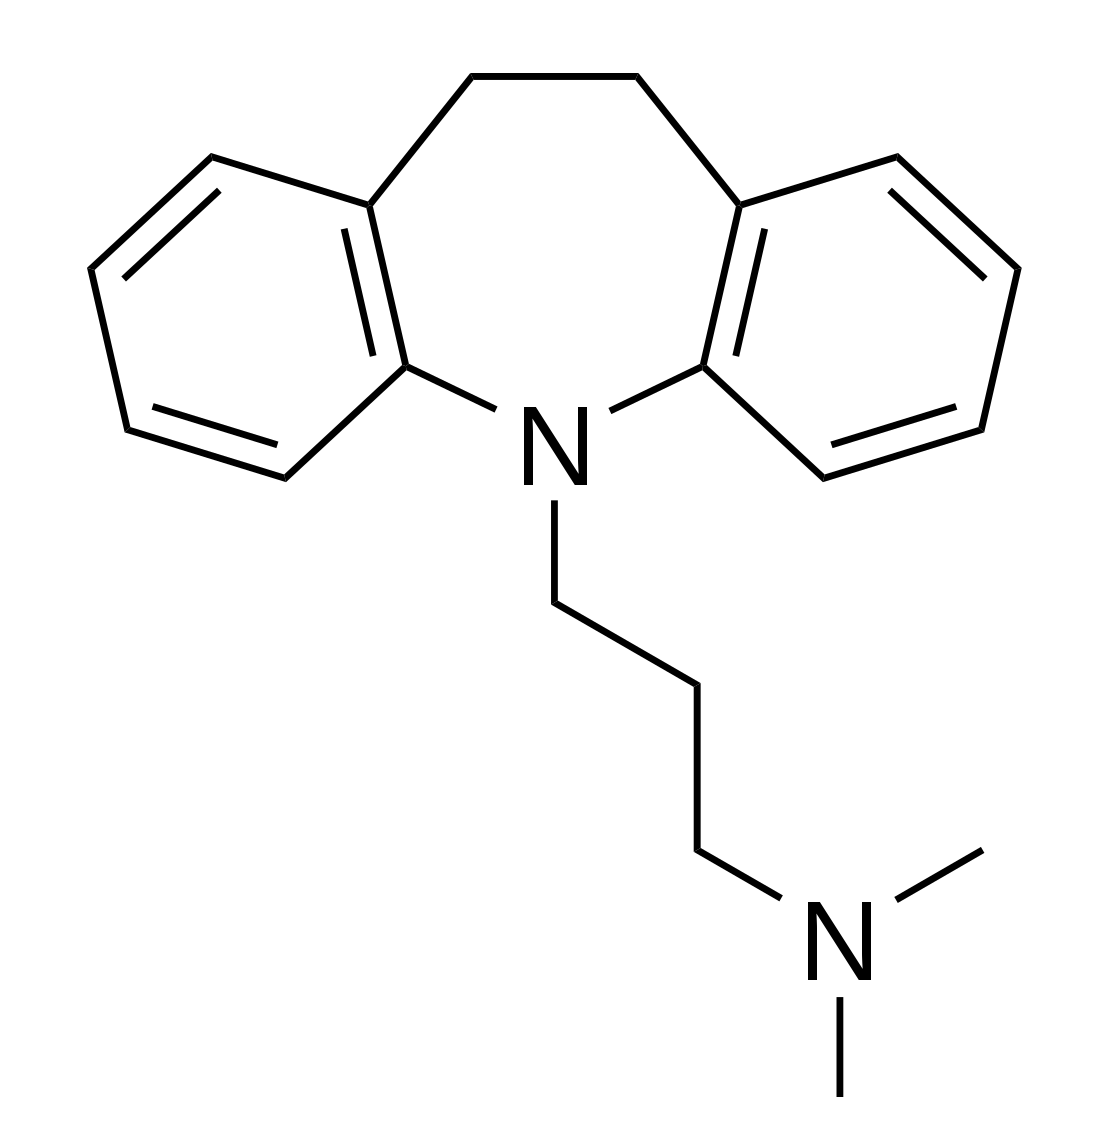 Chemical structure of imipramine, the first tca